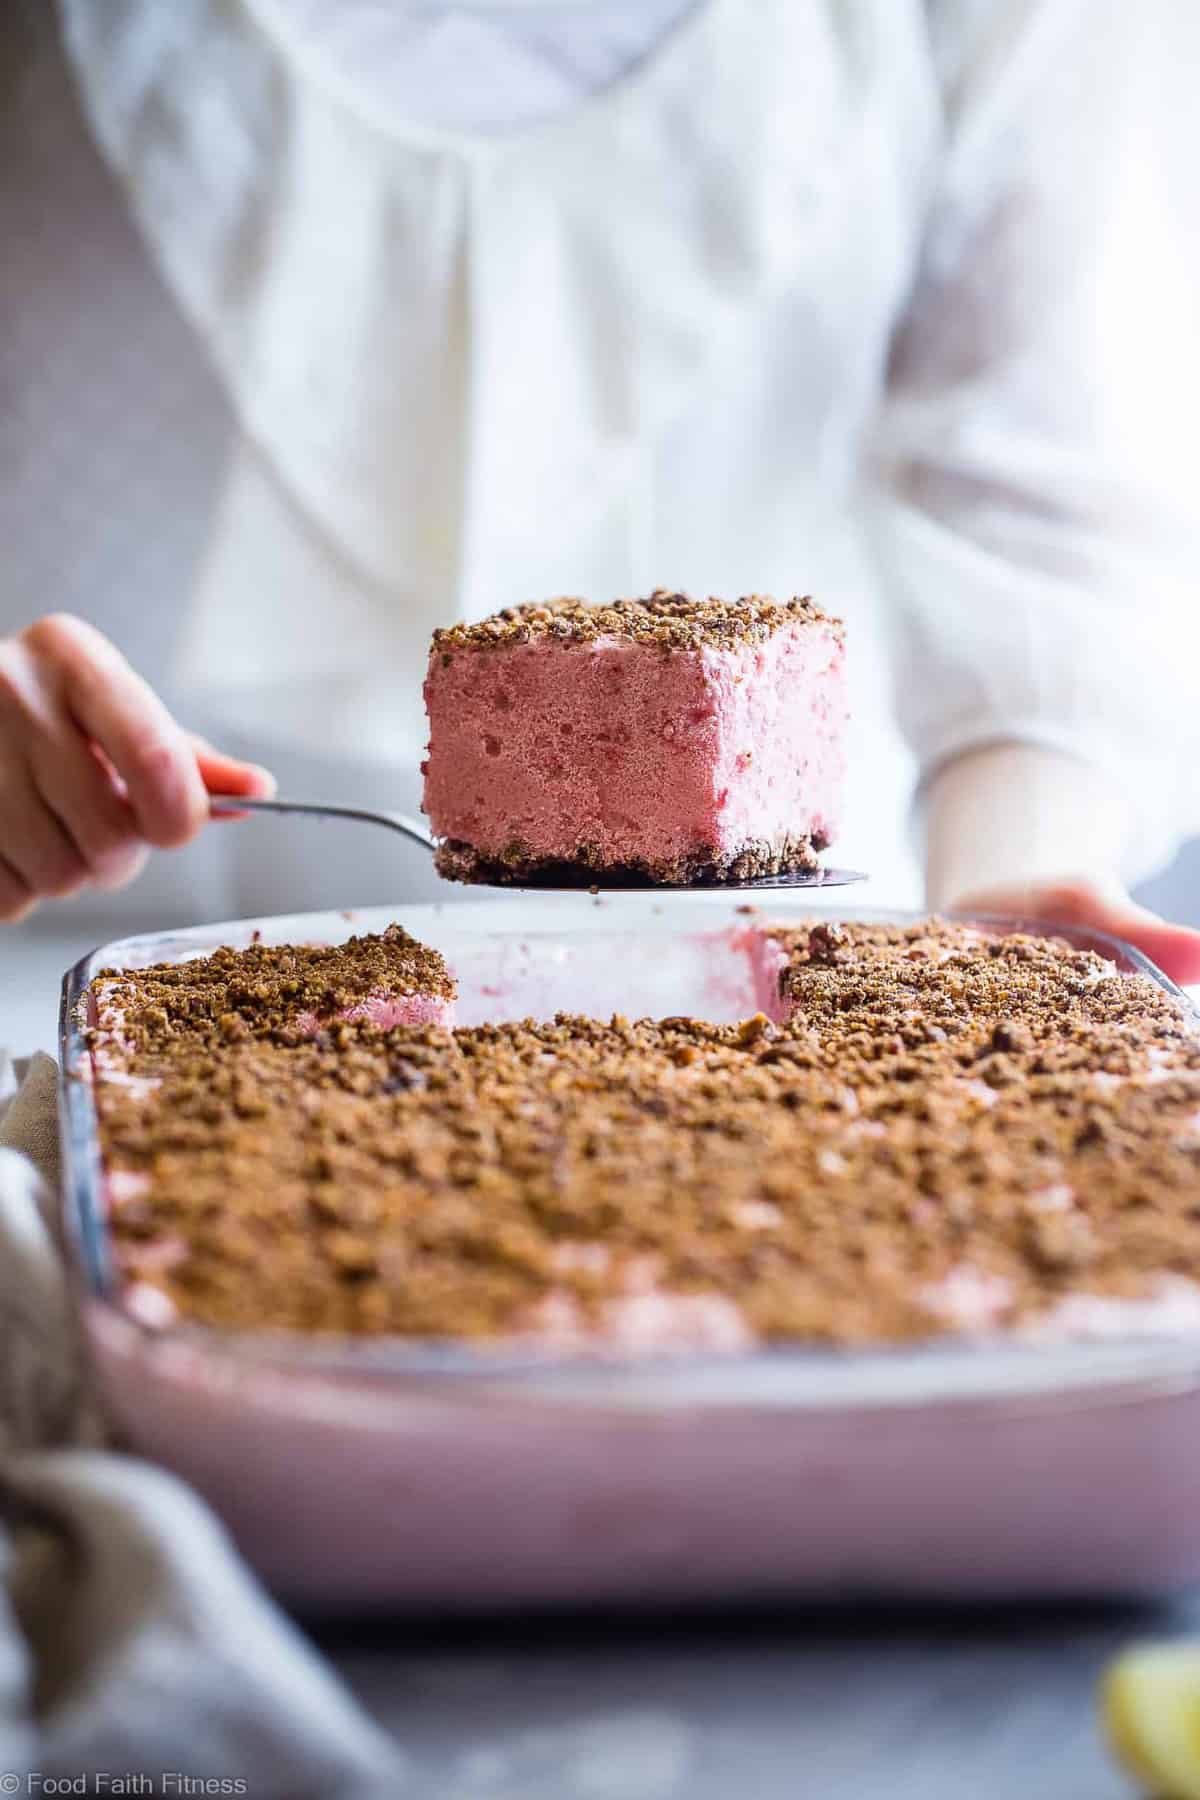 Strawberry Freeze - Looking for some healthy dessert recipes? This is a low calorie, quick and easy, gluten free healthy Frozen Strawberry Dessert Recipe with a crunchy, pecan crumble! Always a hit with kids and adults and everyone always wants the recipe! | #Foodfaithfitness | #Glutenfree #Dairyfree #Healthy #Strawberries #Dessert